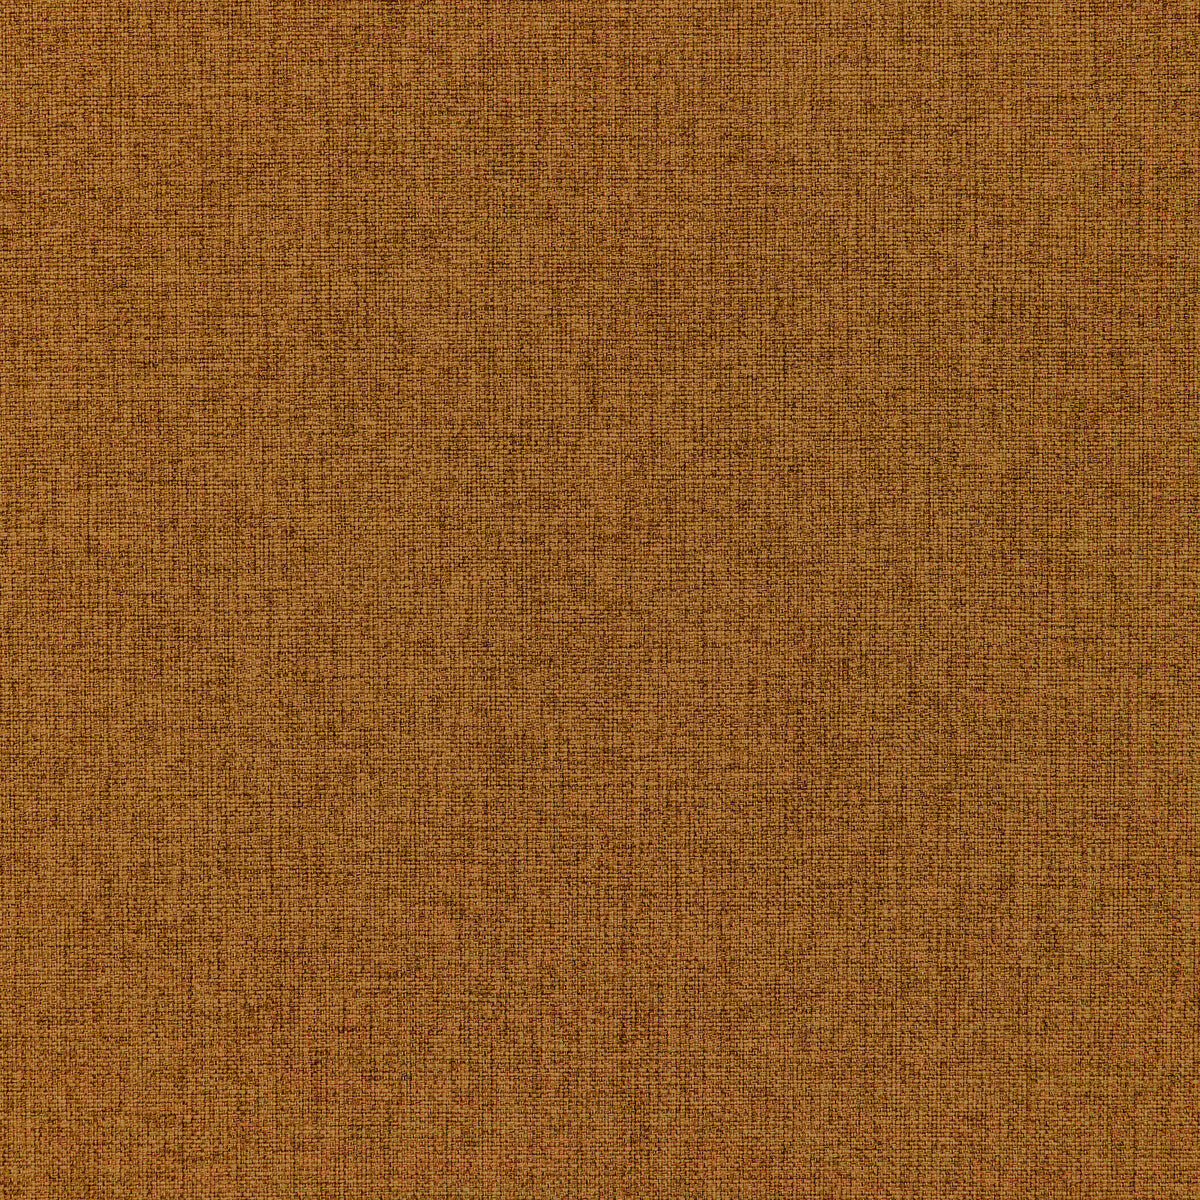 Fortify fabric in cognac color - pattern 36257.24.0 - by Kravet Contract in the Supreen collection